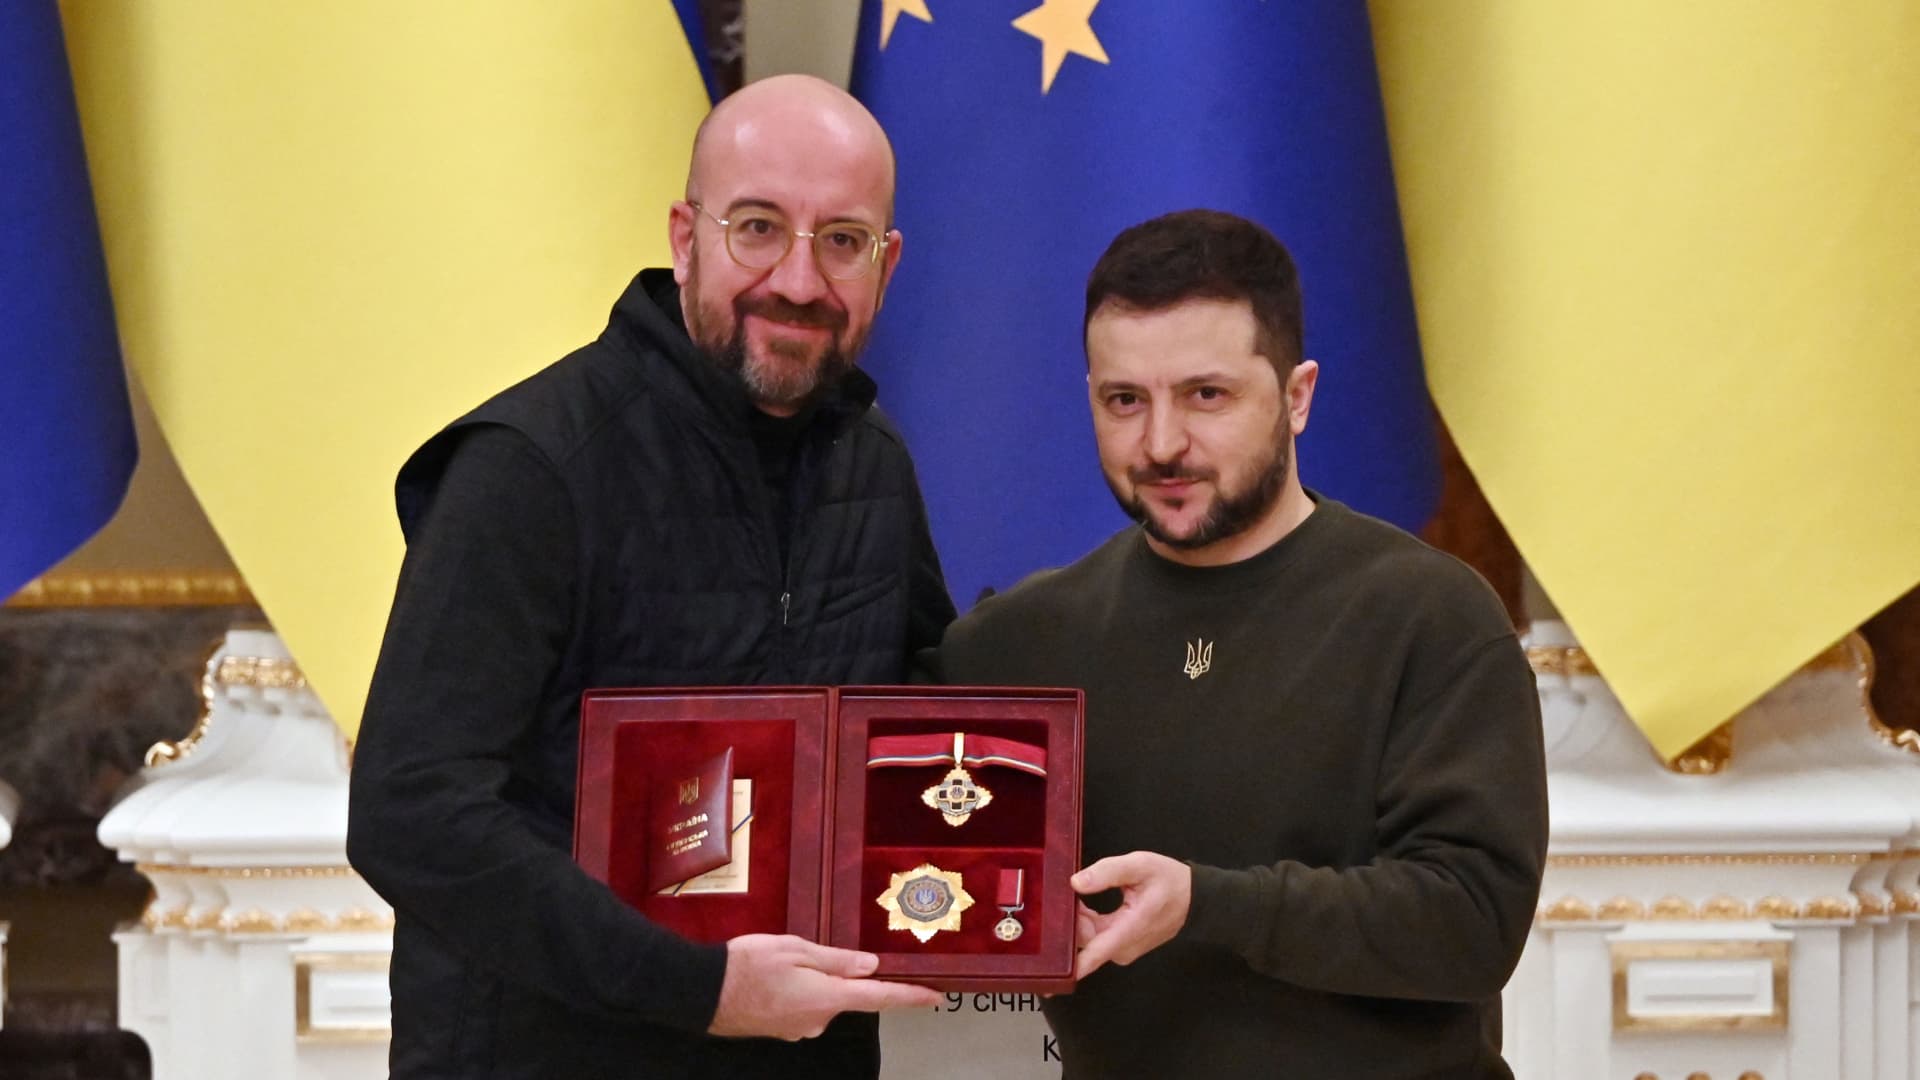 Ukrainian President Volodymyr Zelensky (R) awards the President of the European Council Charles Michel with the Order of Merit title during the press conference following their talks in Kyiv on January 19, 2023.